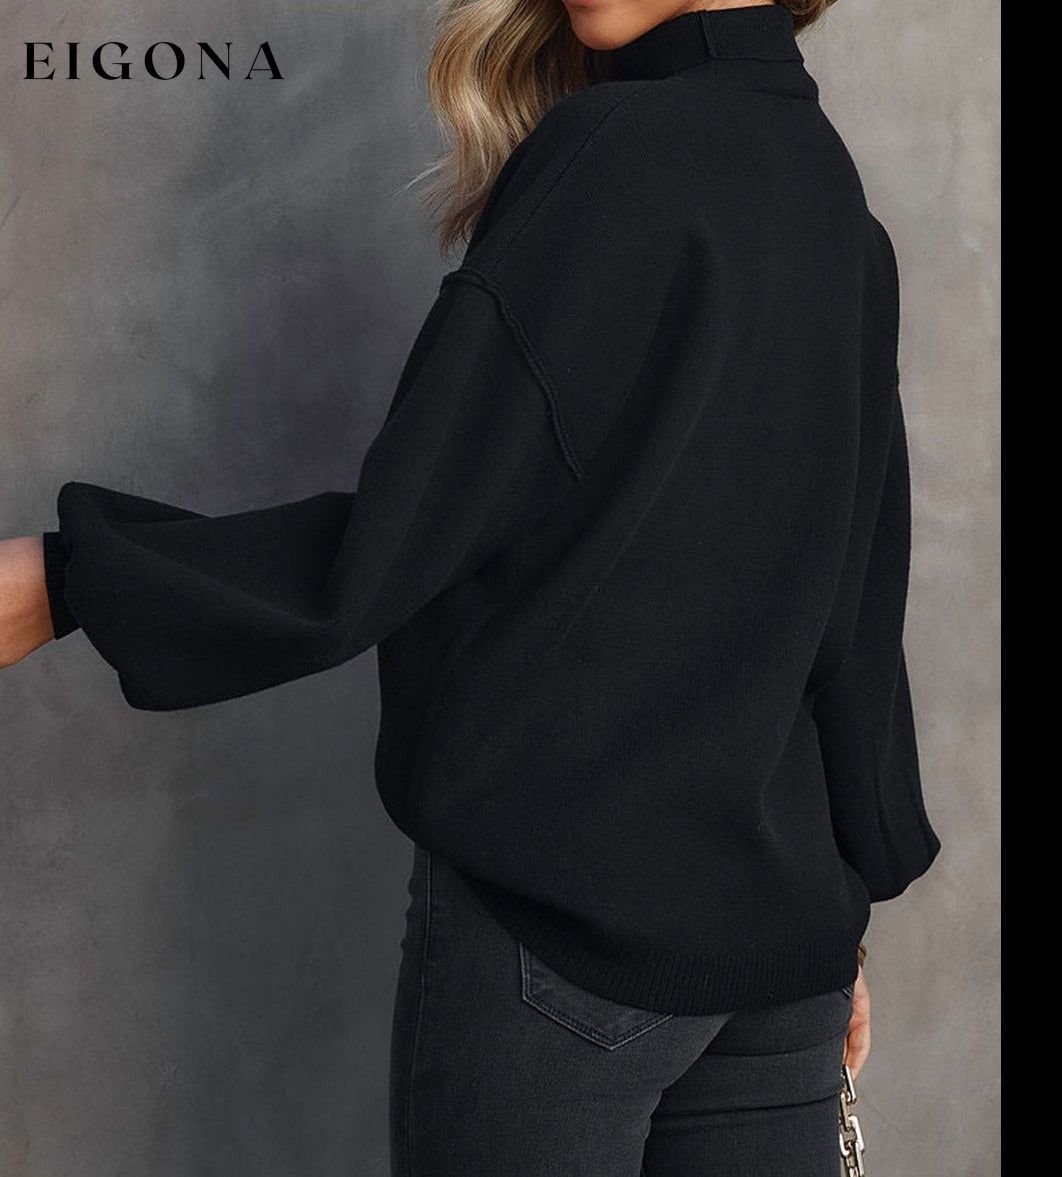 Black Turtleneck Drop Shoulder Bubble Sleeve Knit Sweater All In Stock black sweaters clothes long sleeve dresses long sleeve shirts long sleeve top Occasion Daily Print Solid Color Season Winter Style Elegant